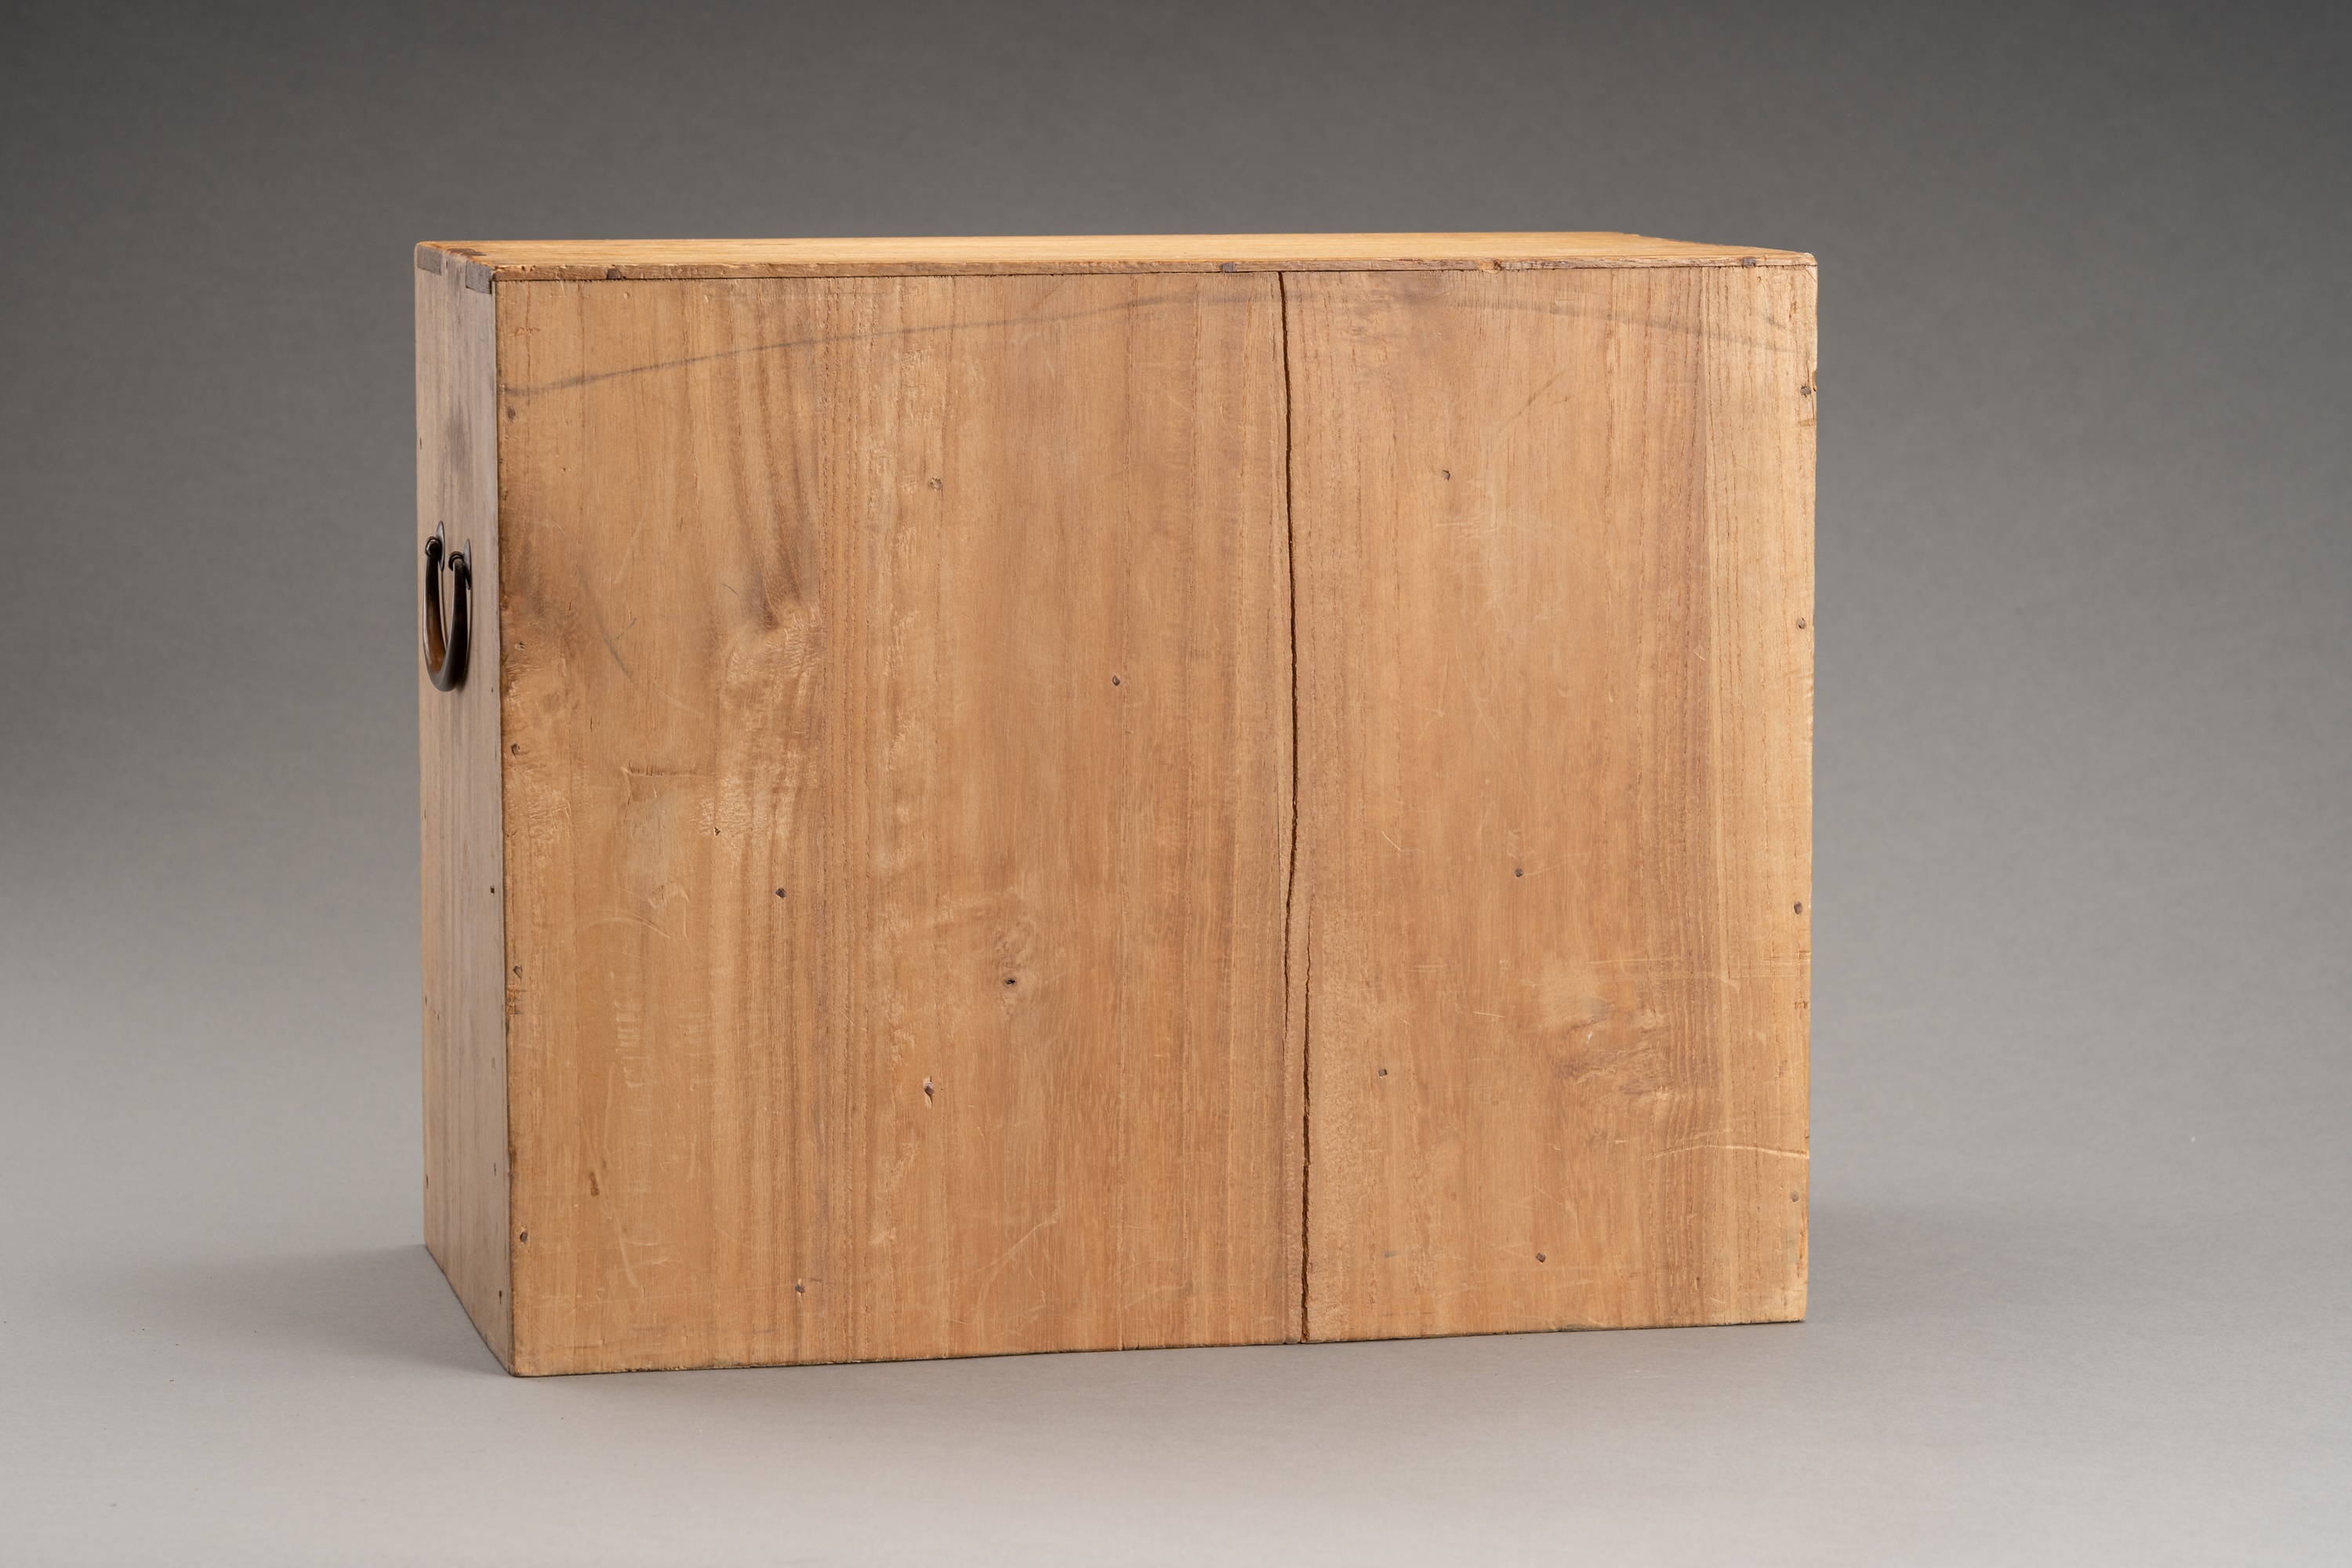 A WOODEN JAPANESE STORAGE BOX WITH 5 DRAWERS - Image 8 of 8